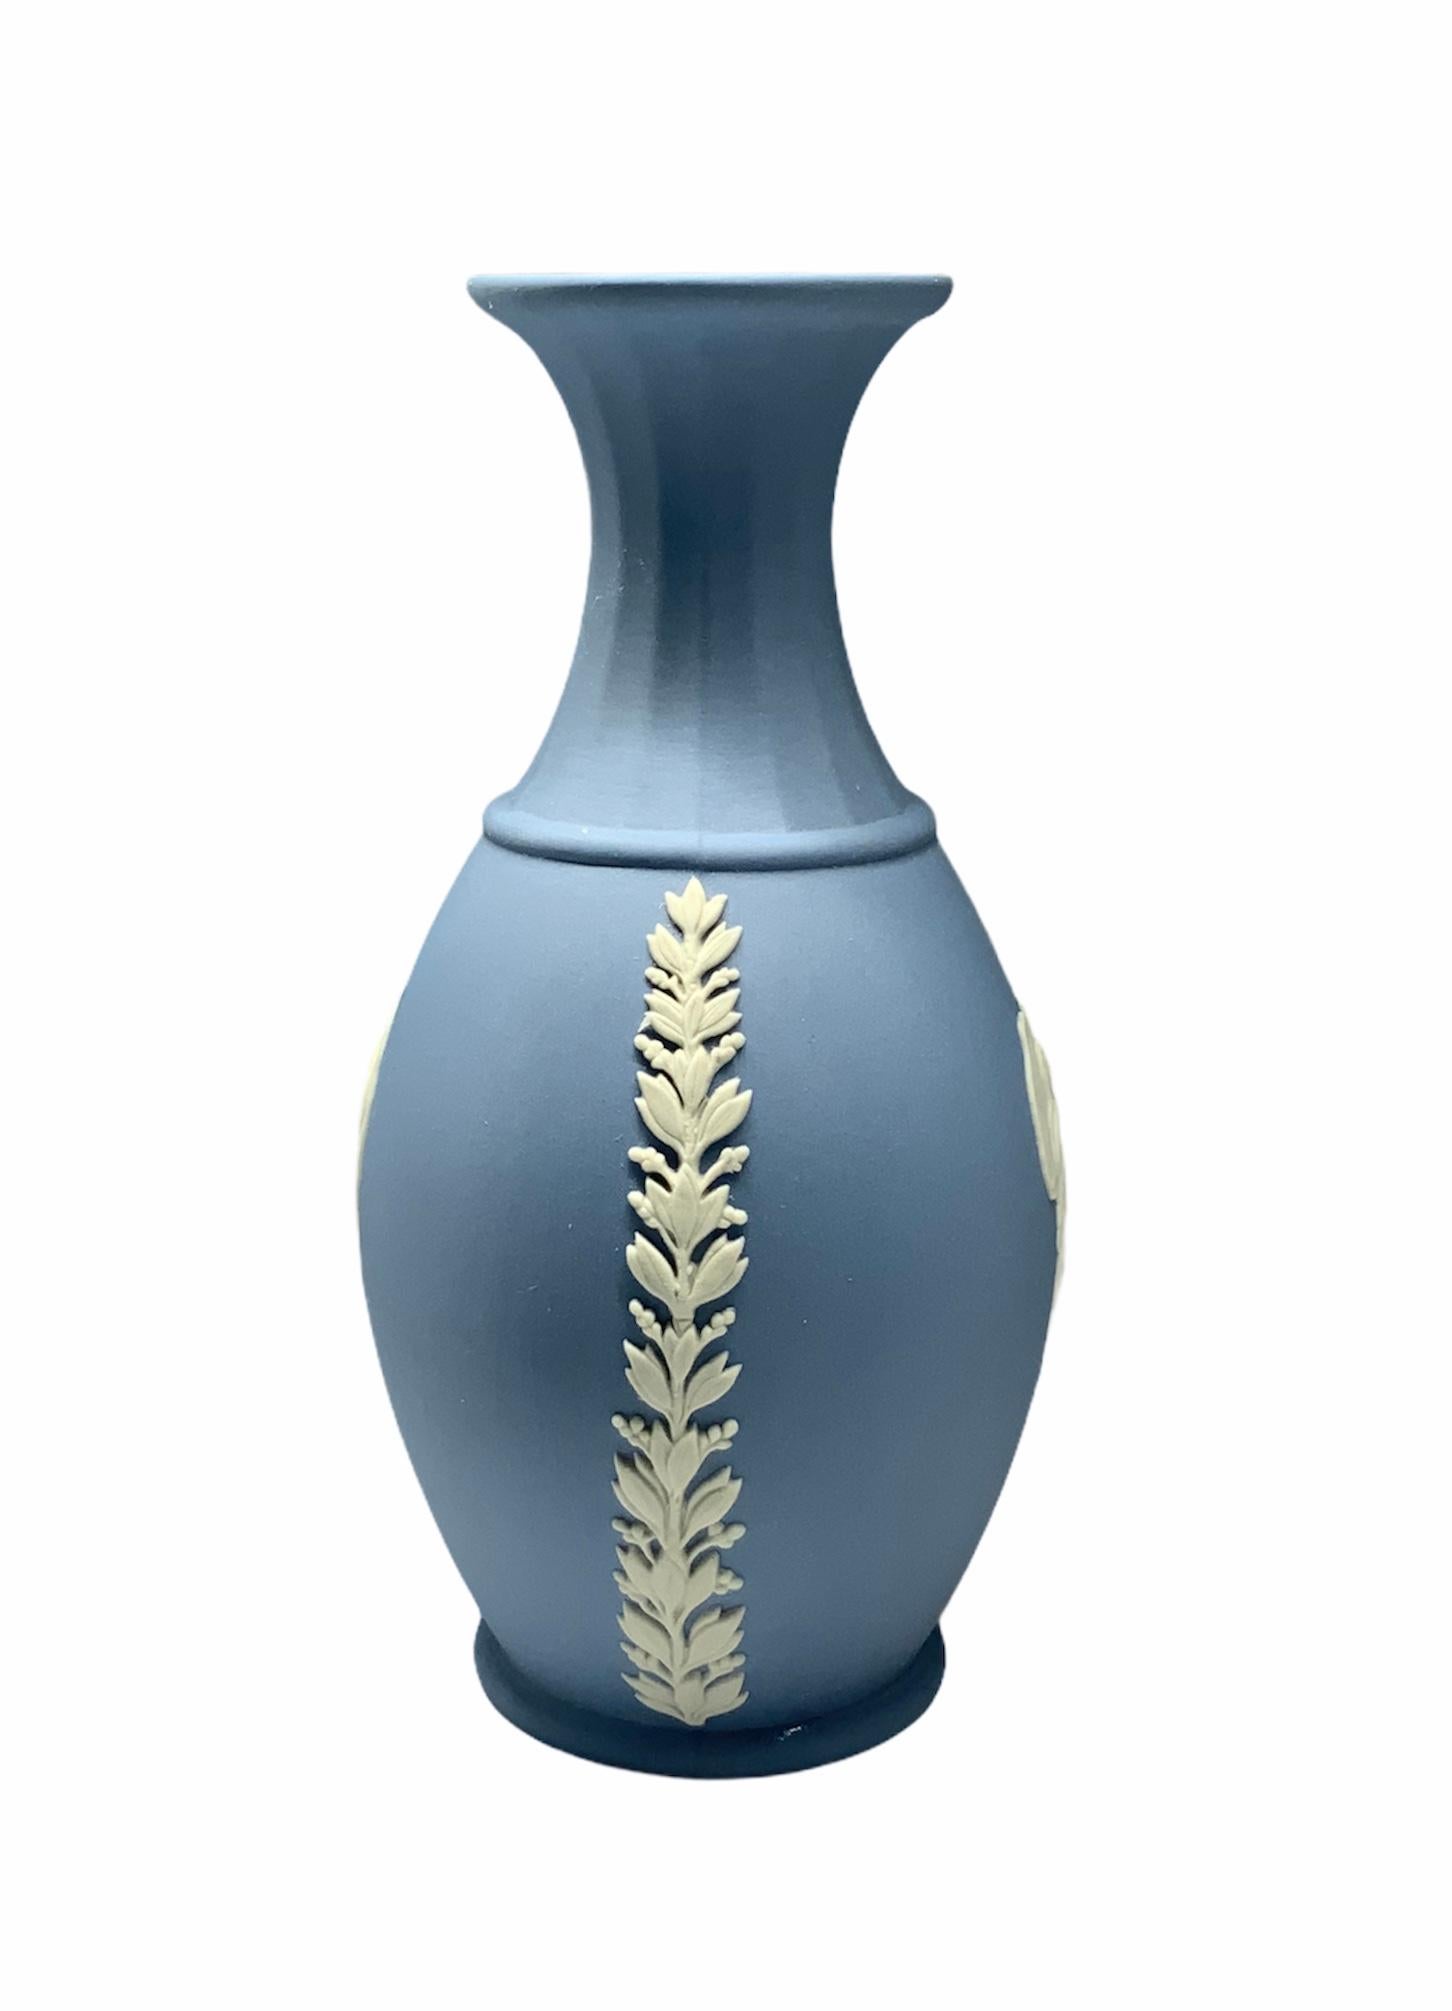 This is a Wedgwood blue porcelain vase with a trumpet fluted neck. It is adorned with two cameos of angel nymphs in the front and back of the bulbous body. The lateral sides are decorated with a vertical garland of laurel branches. Under the base is